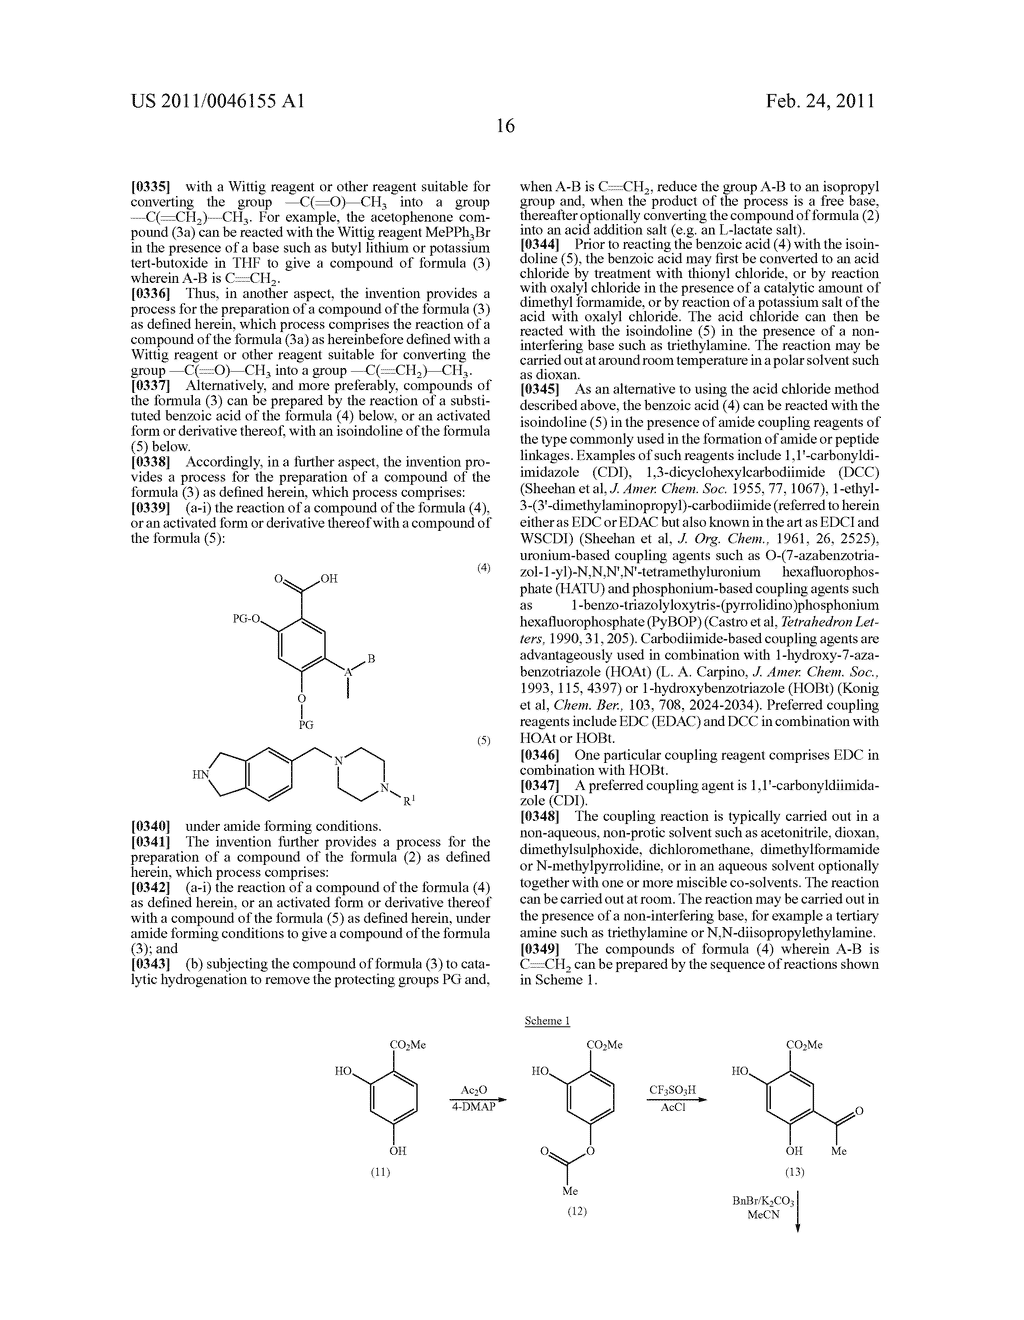 HYDROBENZAMIDE DERIVATIVES AS INHIBITORS OF HSP90 - diagram, schematic, and image 29